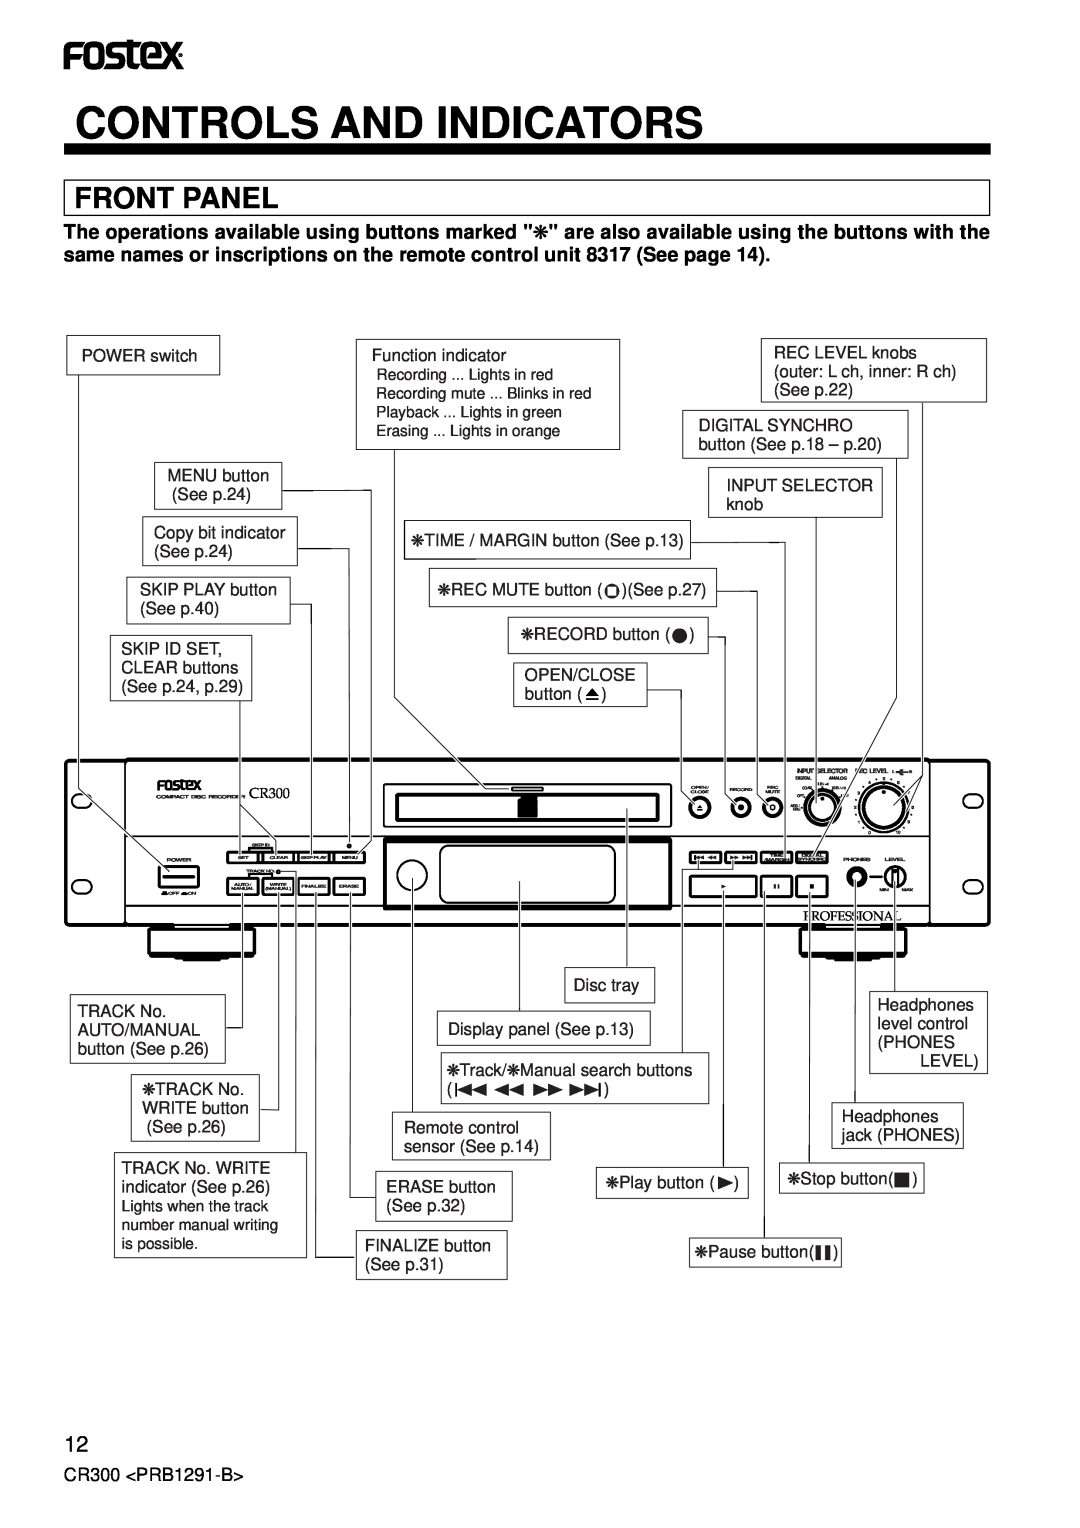 Fostex CR300 owner manual Controls And Indicators, Front Panel 